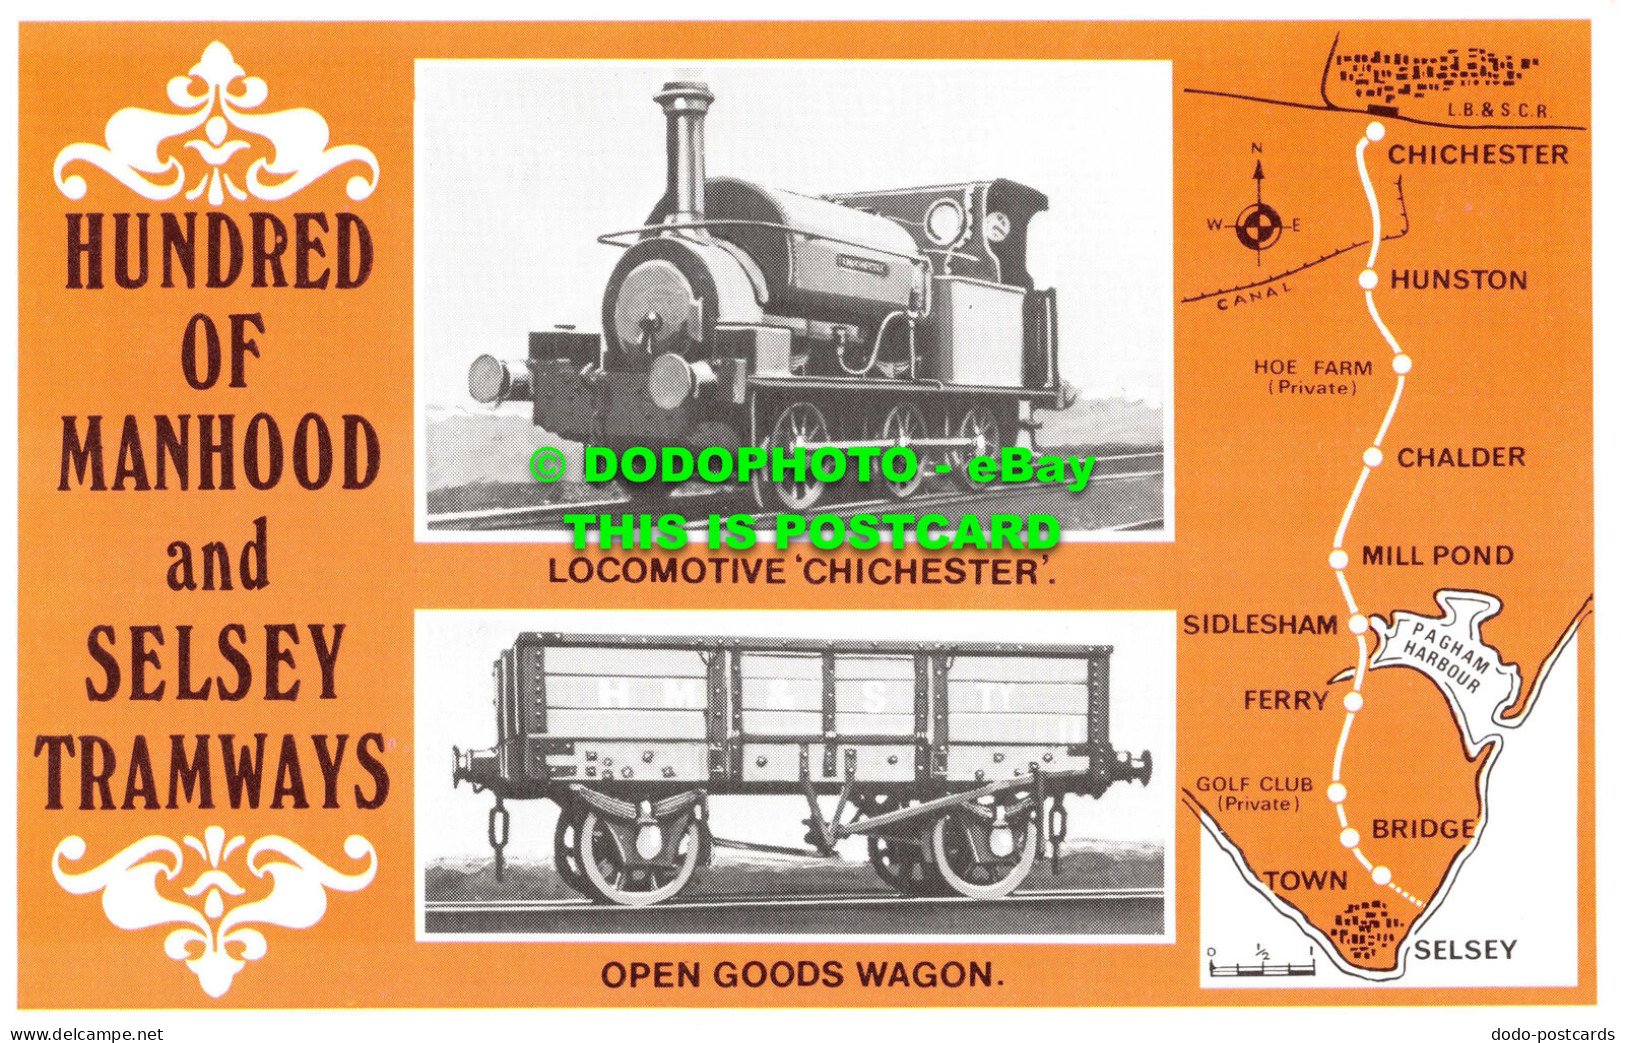 R542985 Hundred Of Manhood And Selsey Tramways. Open Goods Wagon. Dalkeith Pictu - World